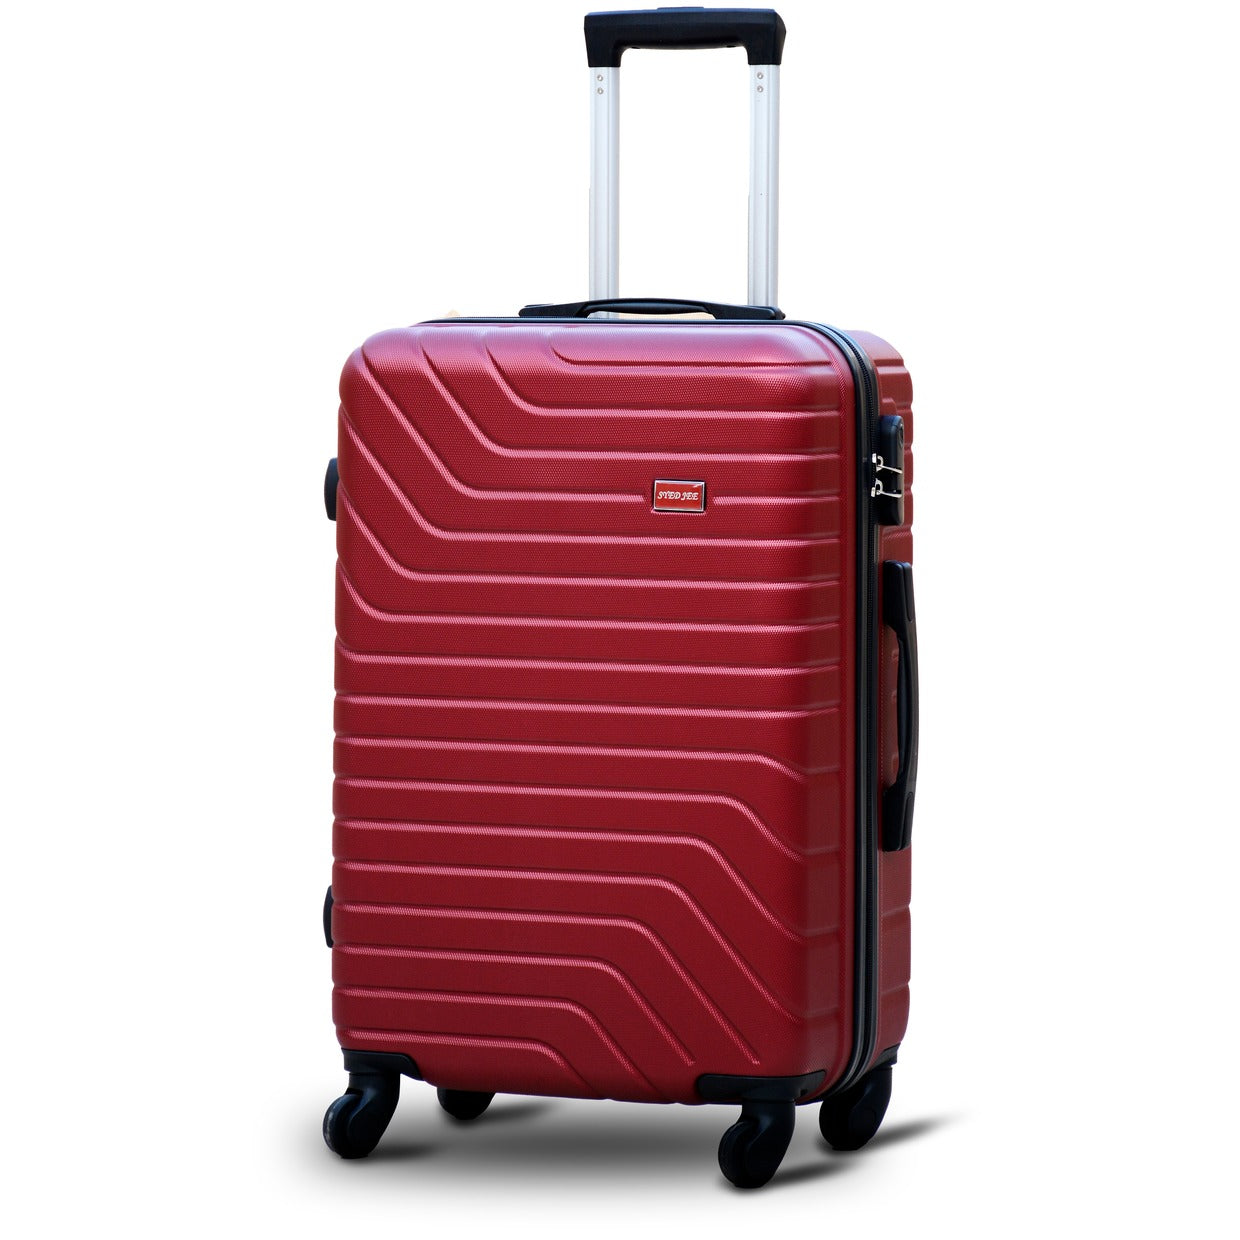 20" Red Colour SJ ABS Carry On Luggage Lightweight Hard Case Trolley Bag